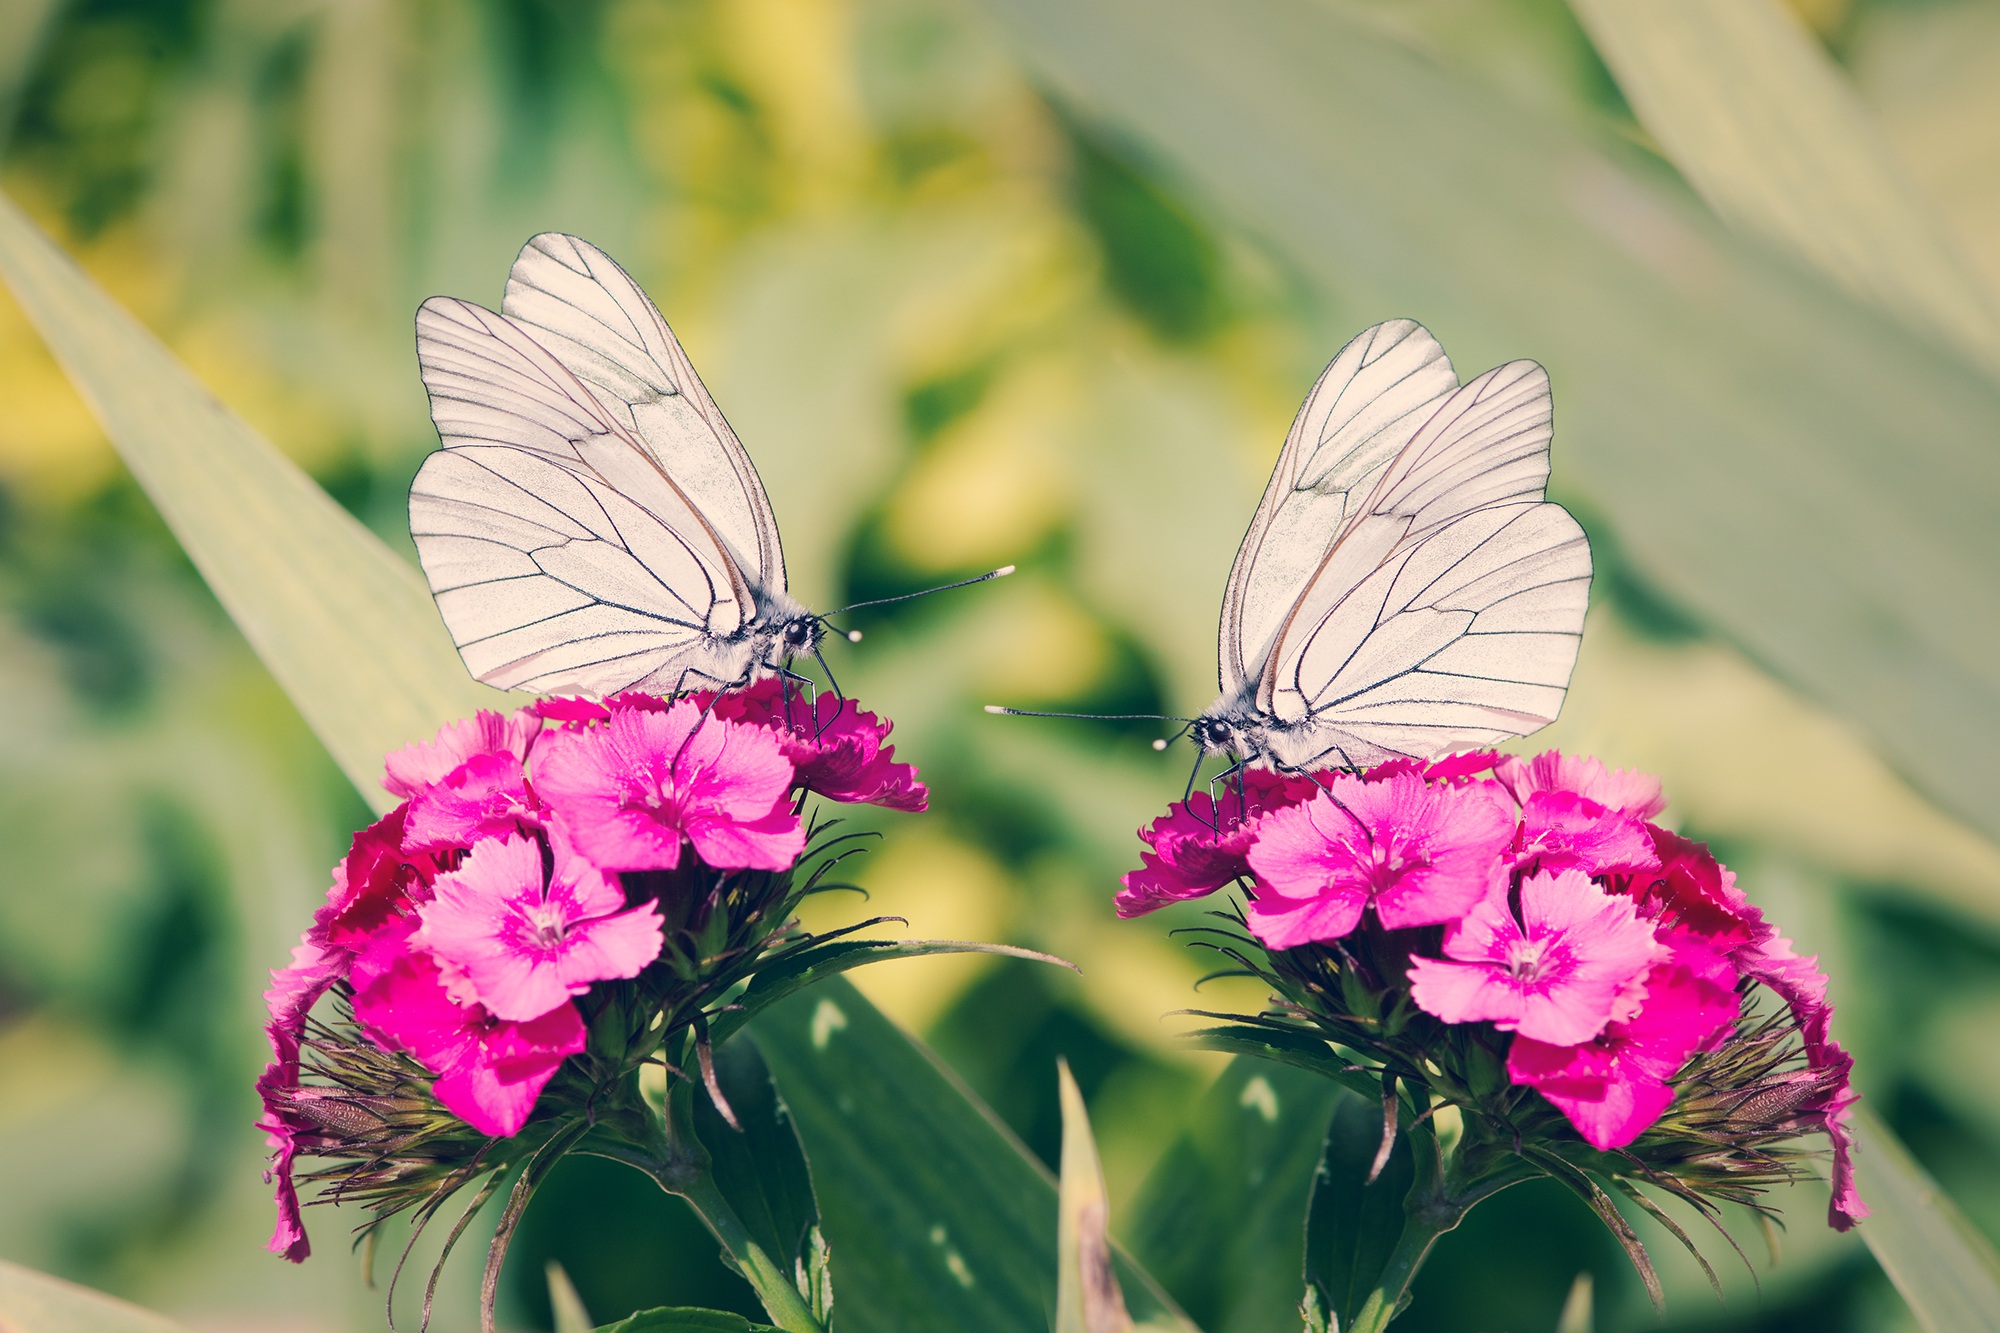 Two white butterflies on pink carnations (Dianthus) by Pezibear